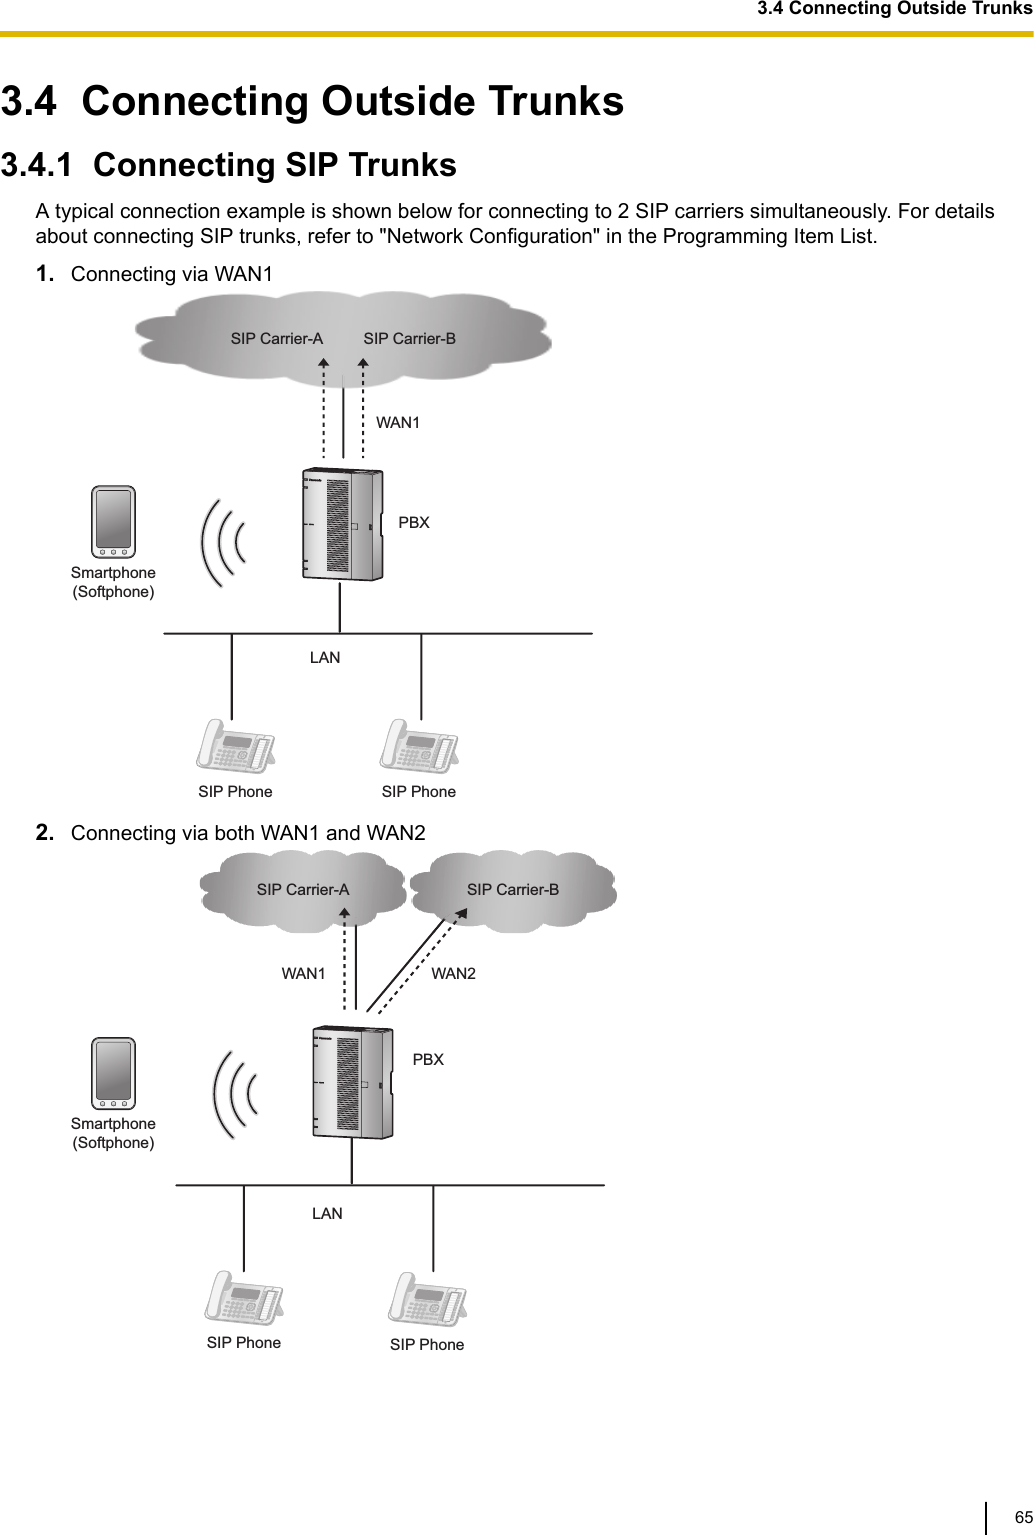 3.4  Connecting Outside Trunks3.4.1  Connecting SIP TrunksA typical connection example is shown below for connecting to 2 SIP carriers simultaneously. For detailsabout connecting SIP trunks, refer to &quot;Network Configuration&quot; in the Programming Item List.1. Connecting via WAN1SIP Phone SIP PhonePBXWAN1Smartphone(Softphone)LANSIP Carrier-A SIP Carrier-B2. Connecting via both WAN1 and WAN2SIP Phone SIP PhonePBXSmartphone(Softphone)LANSIP Carrier-A SIP Carrier-BWAN2WAN13.4 Connecting Outside Trunks65